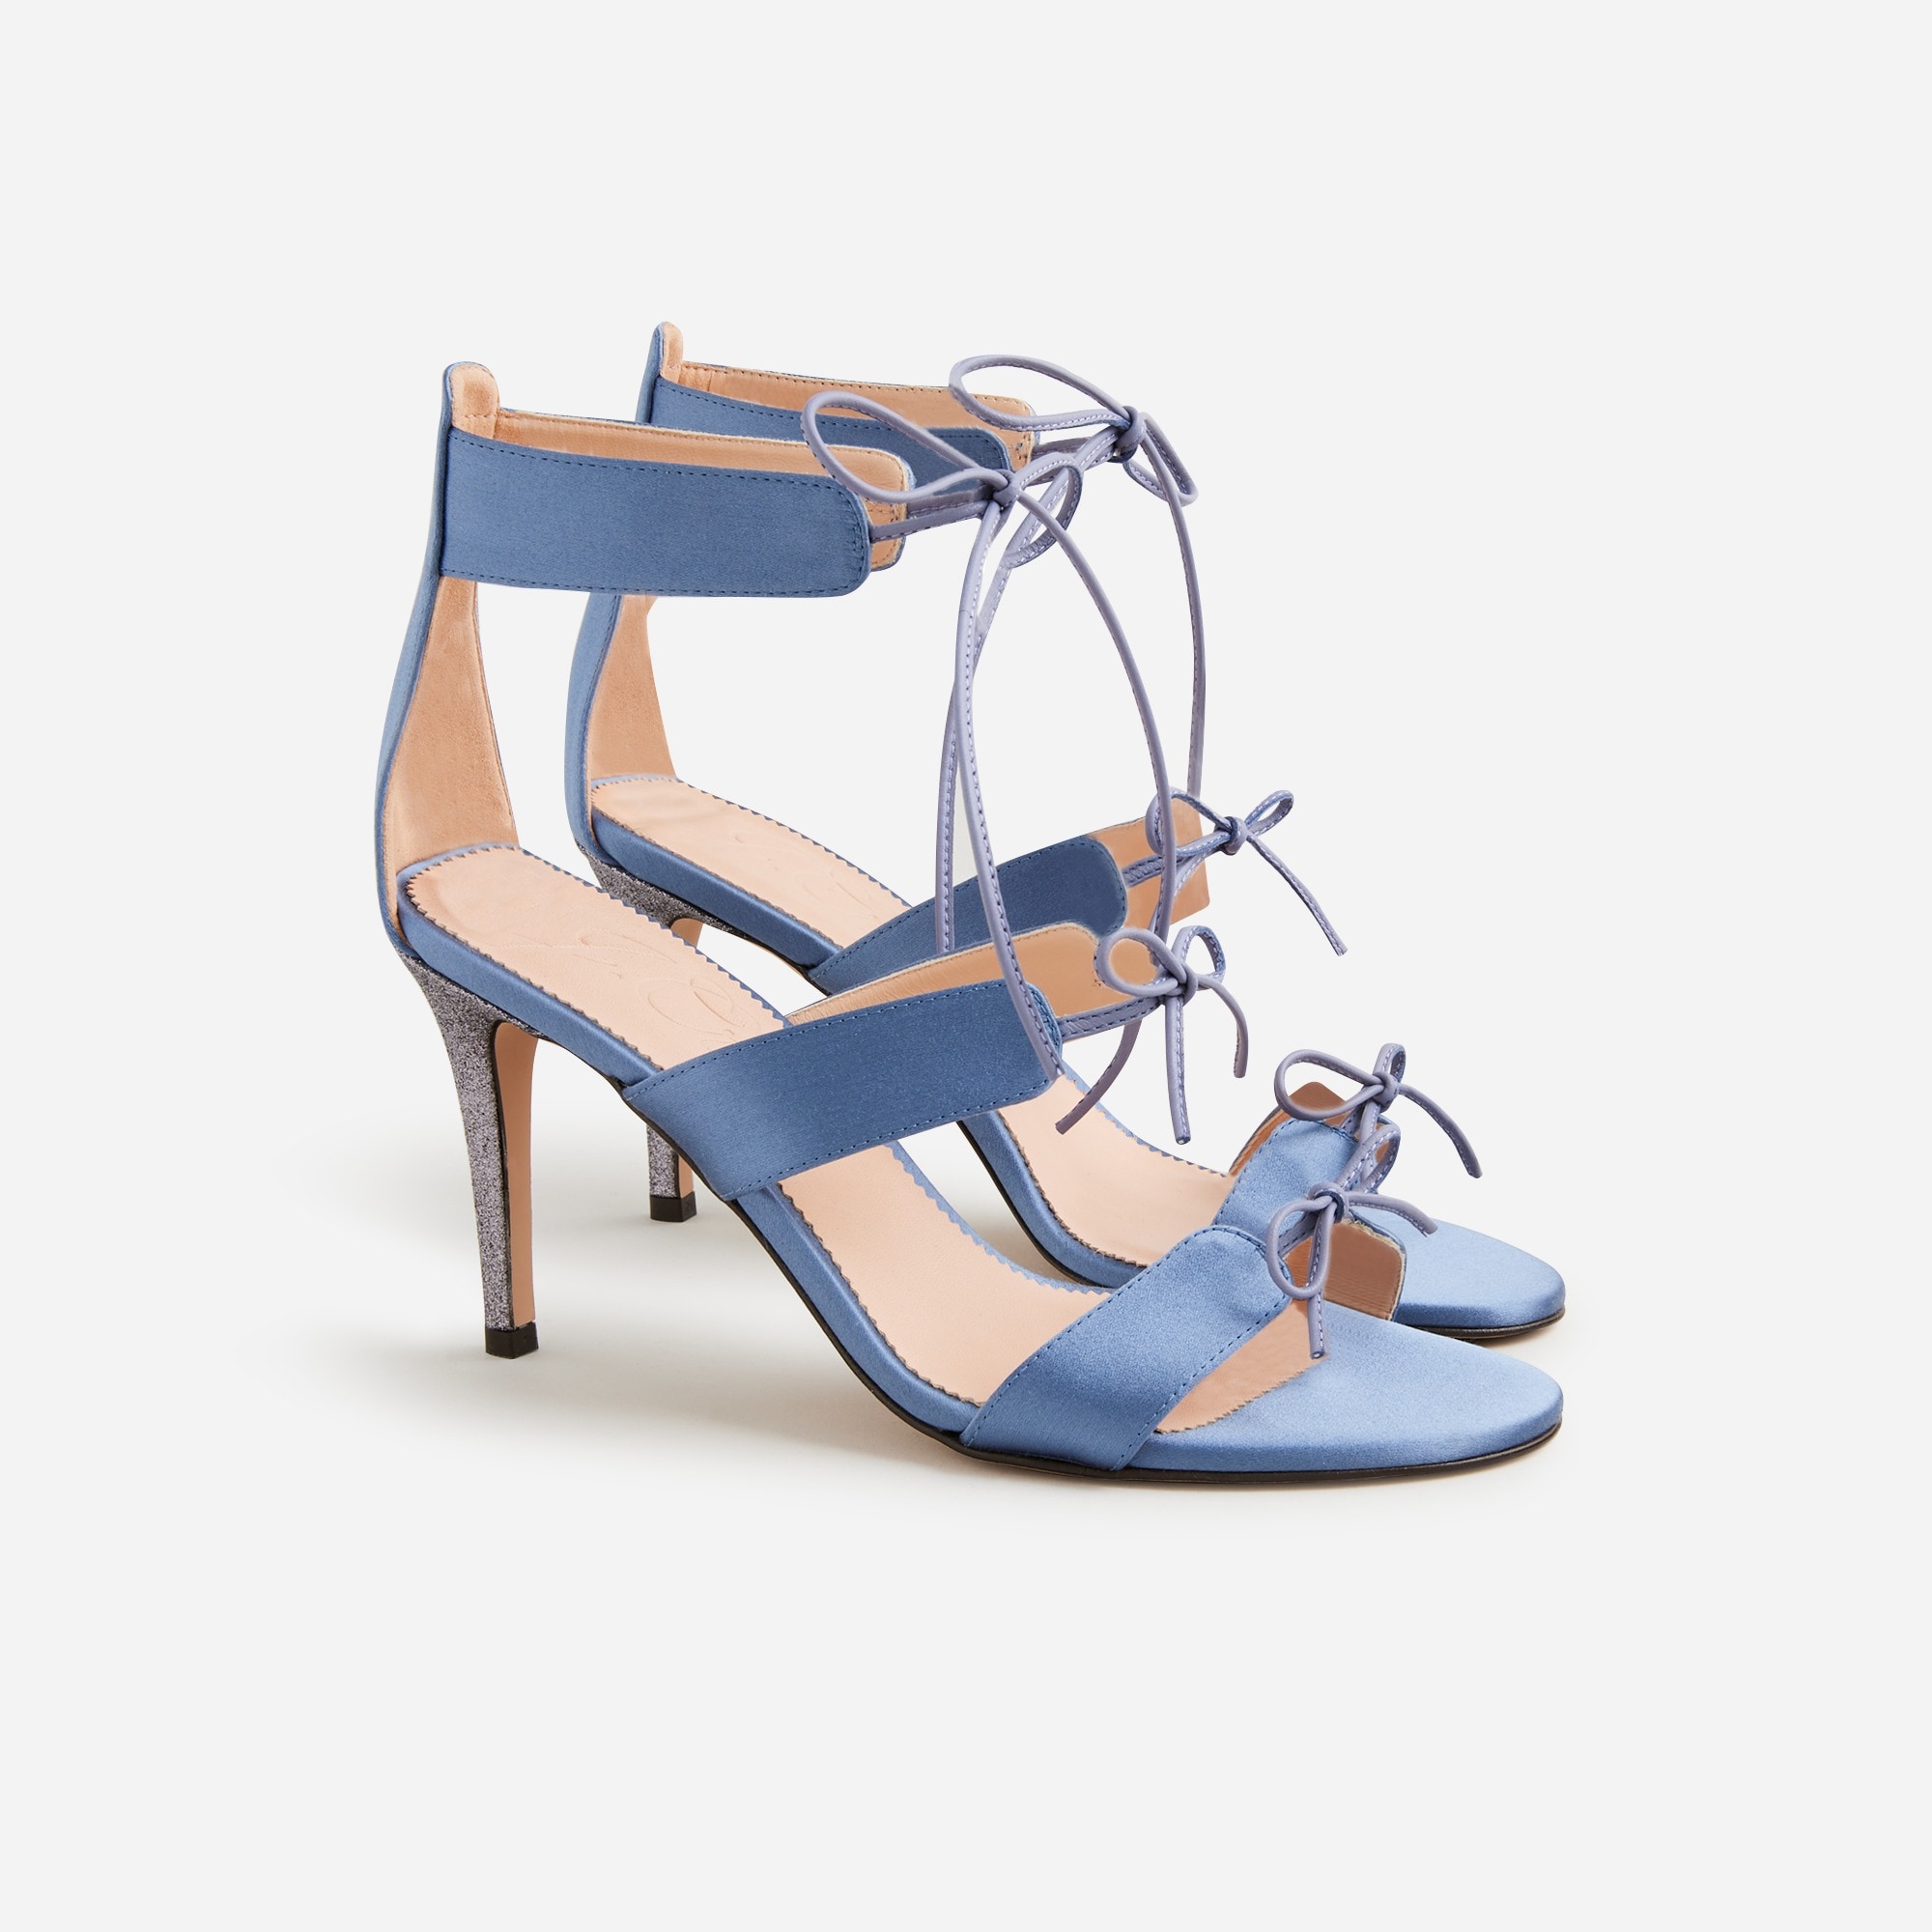 Jcrew Collection Rylie lace-up heels in Italian satin